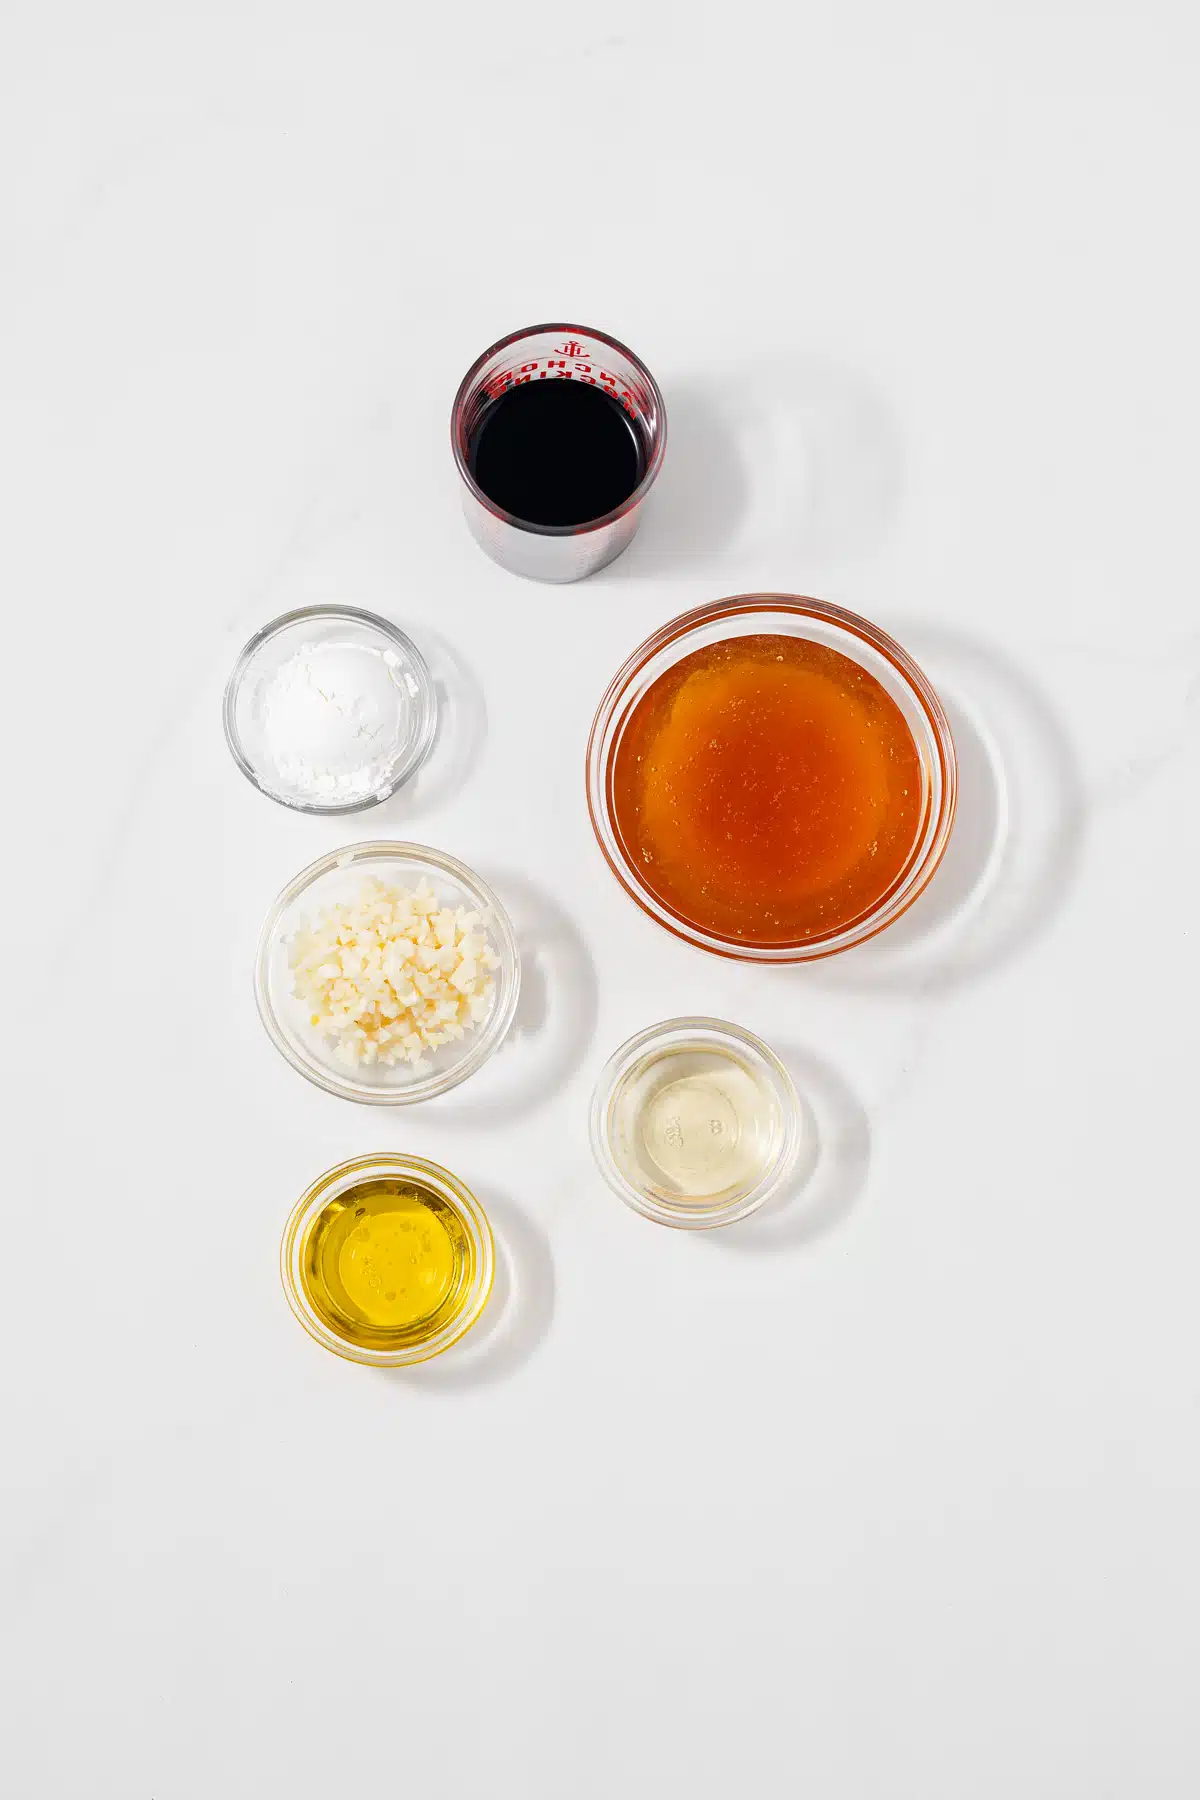 Ingredients in glass bowls.